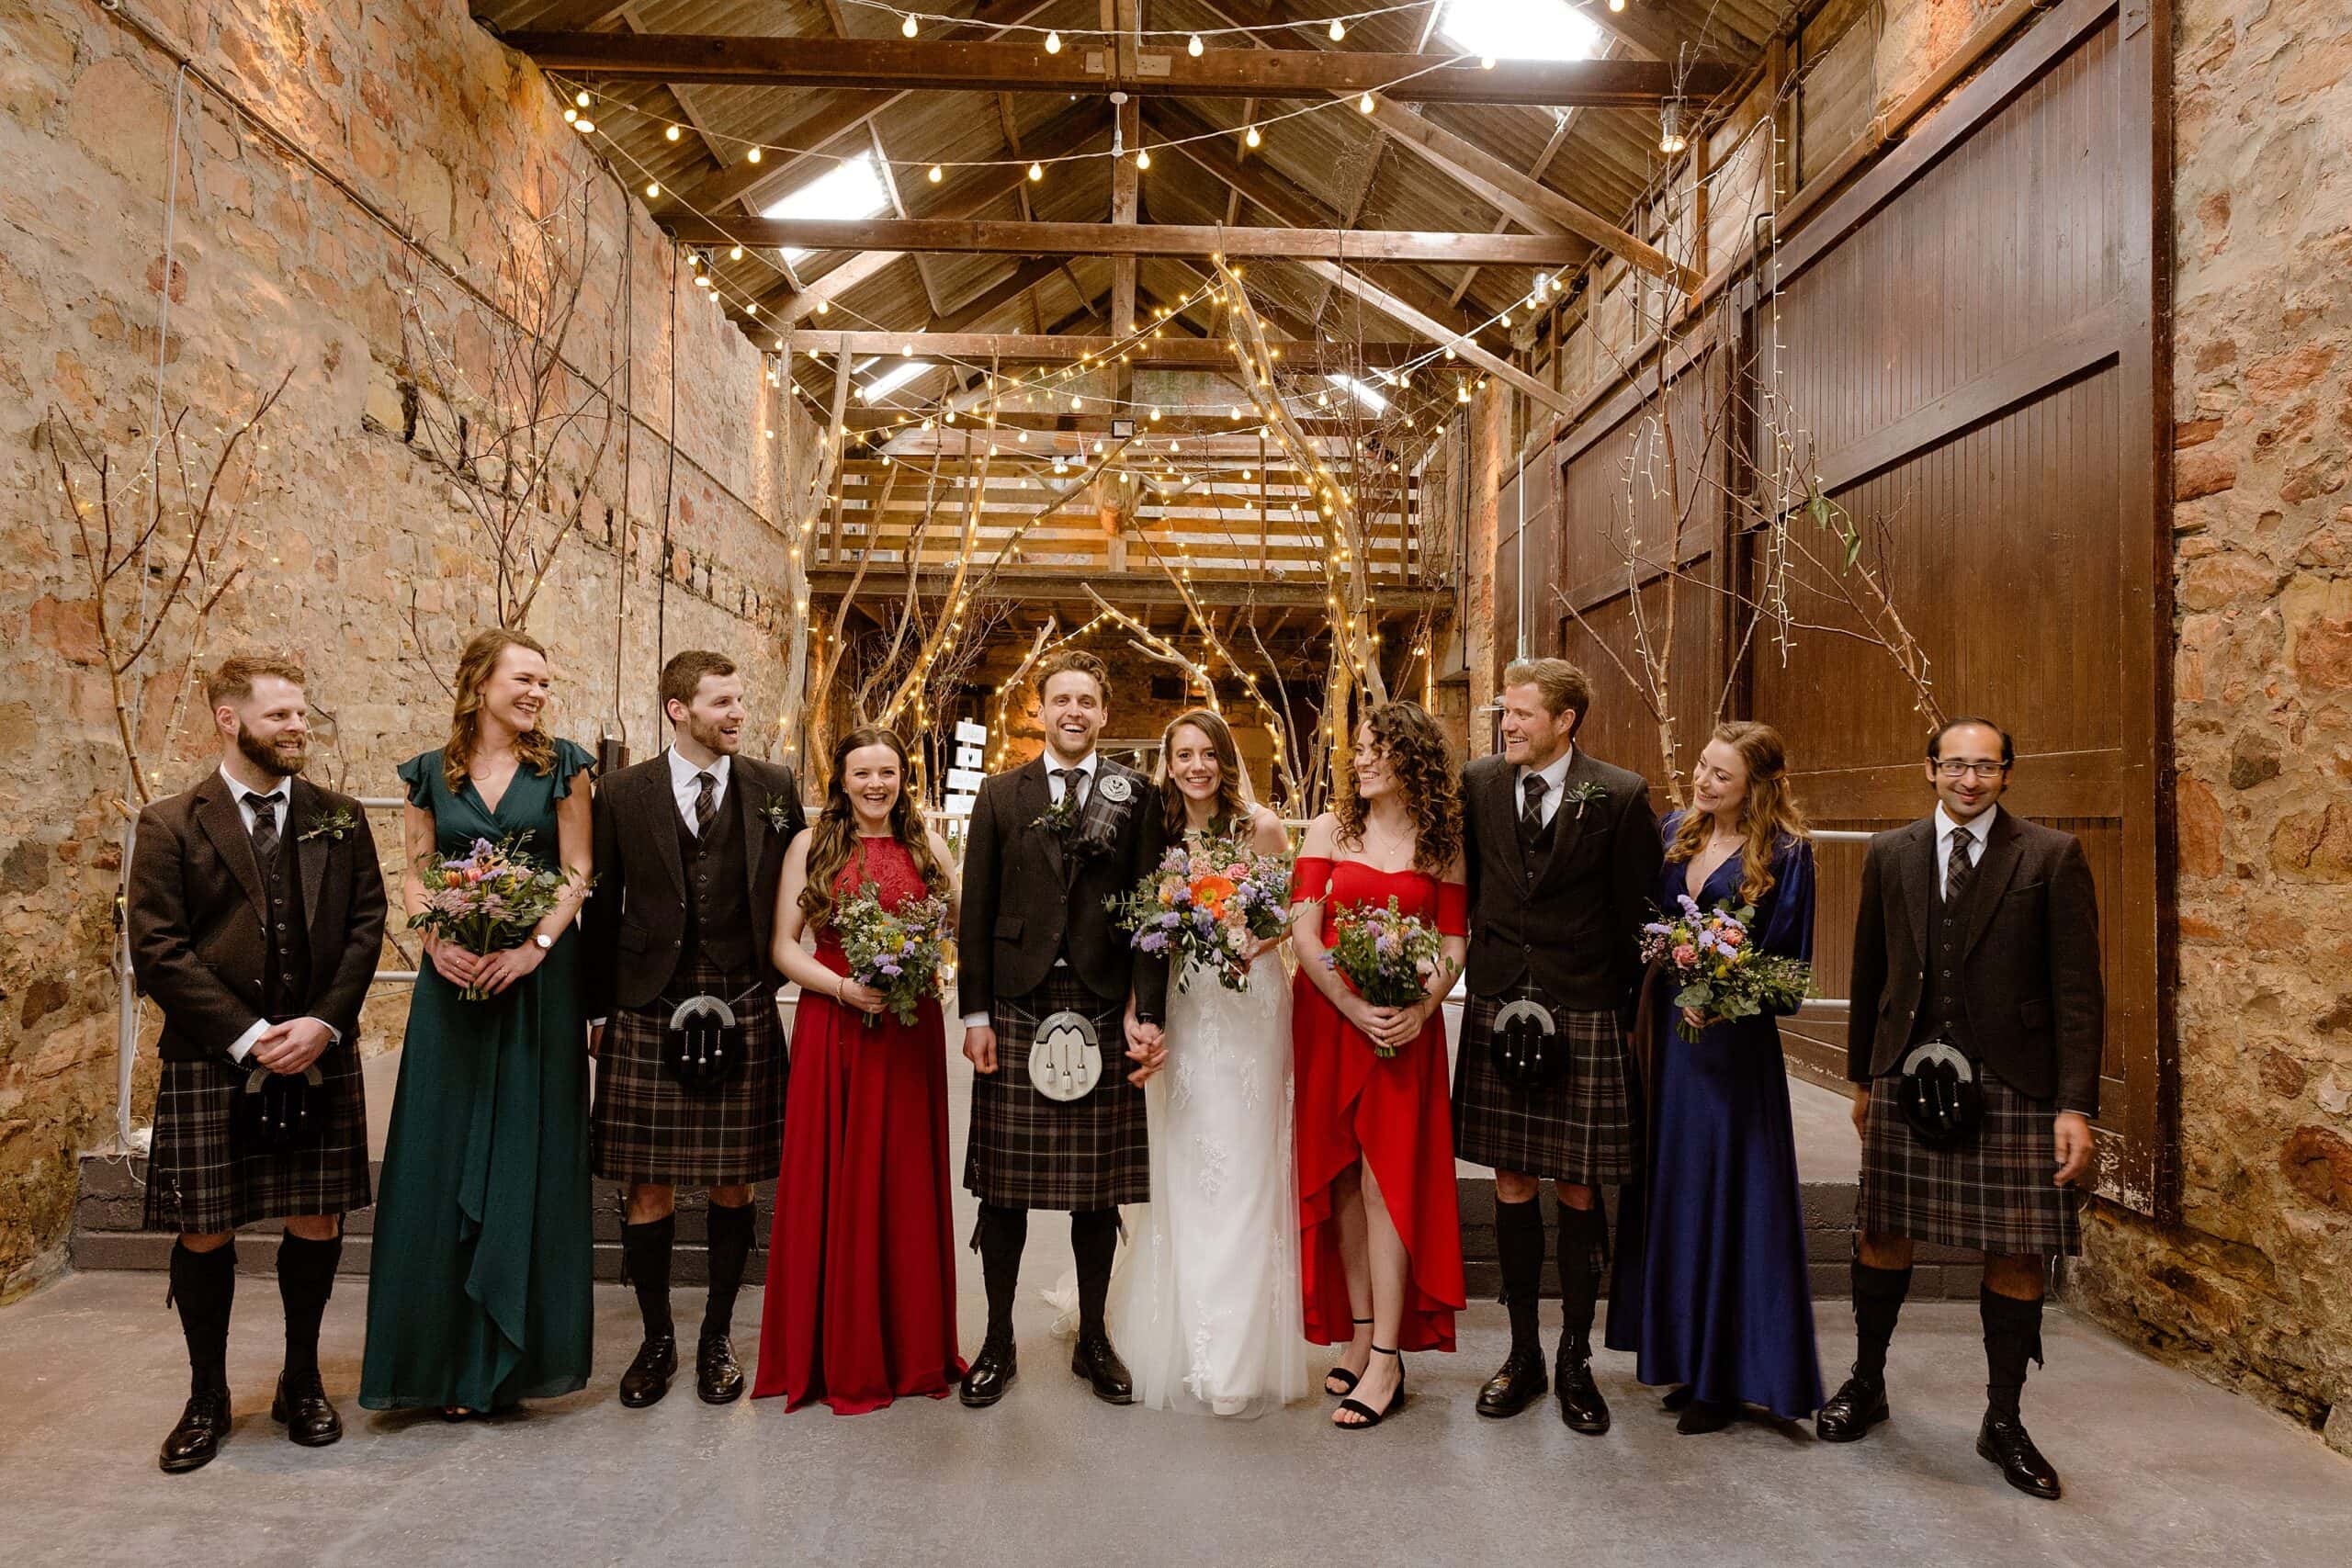 interior inside view of a farm wedding venue showing the bride groom bridesmaids and groomsmen standing in front of an archway of branches and festoon lights photographed by st andrews wedding photographer